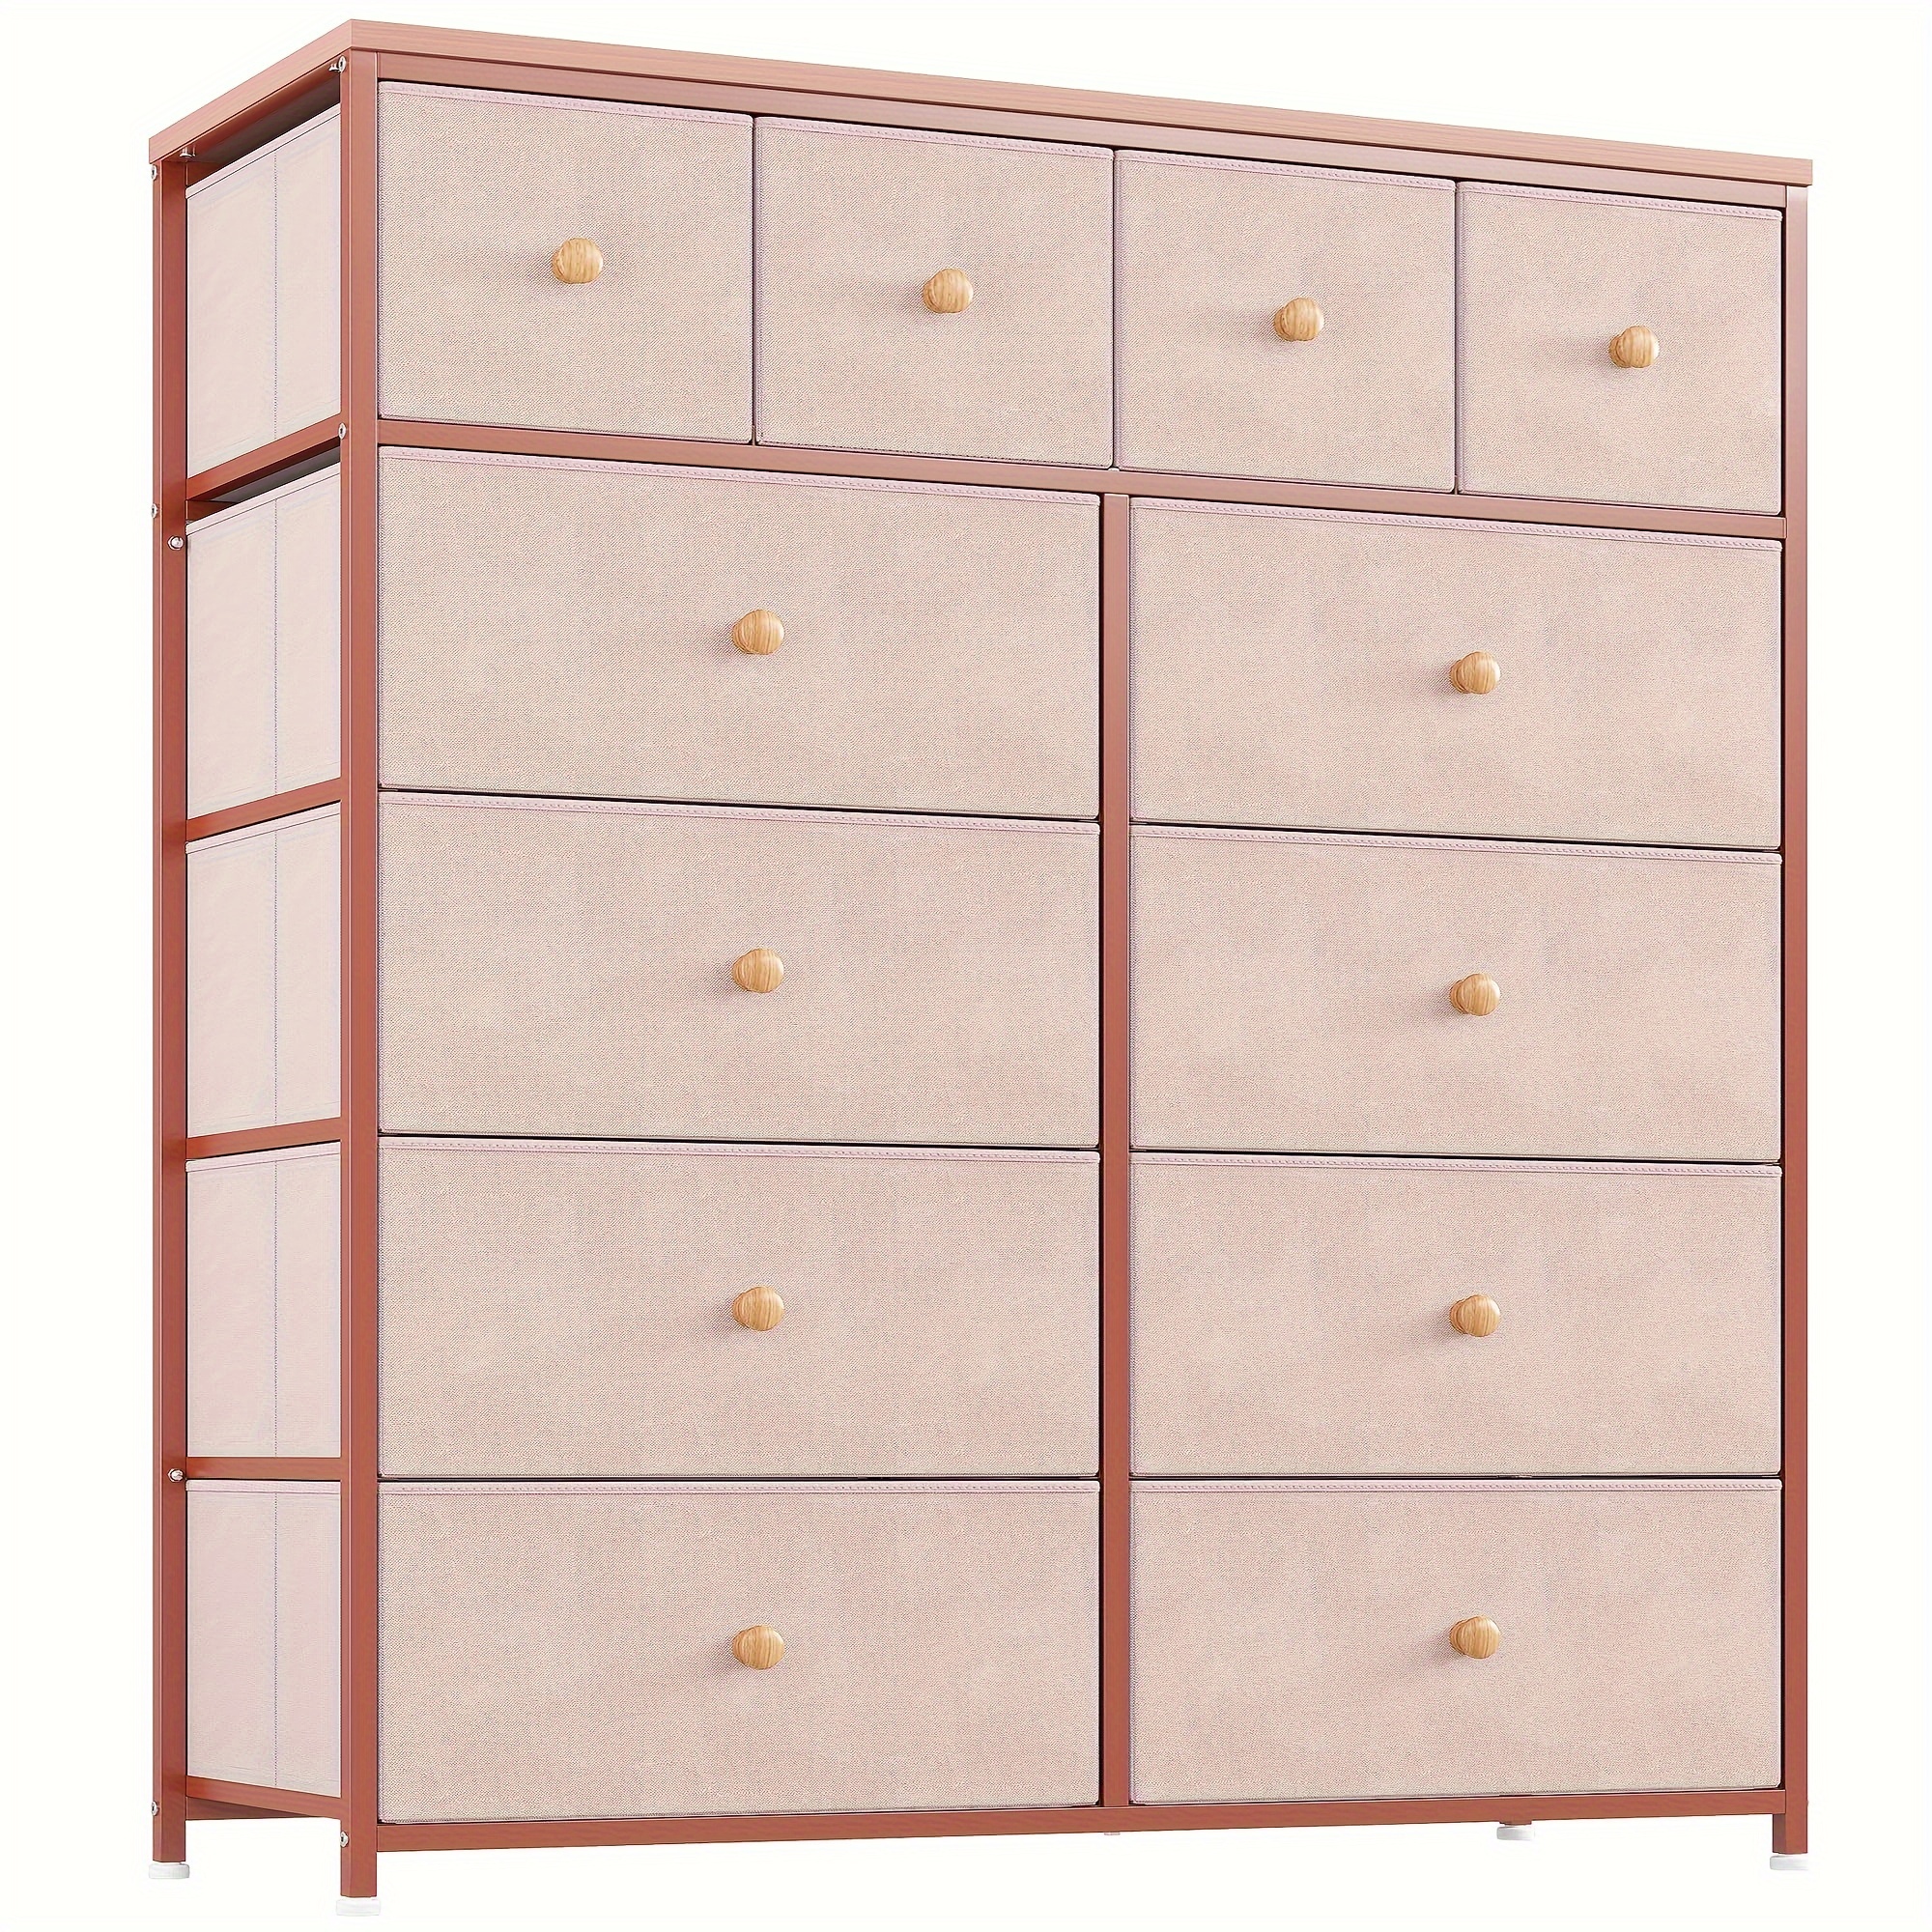 

Pink Dresser For Girls Bedroom With 12 Drawers, Dresser For Bedroom With Sturdy Metal Frame And Wooden Top, Bedroom Dressers & Chests Of Drawers For Bedroom, Nursery, Closet, Pink